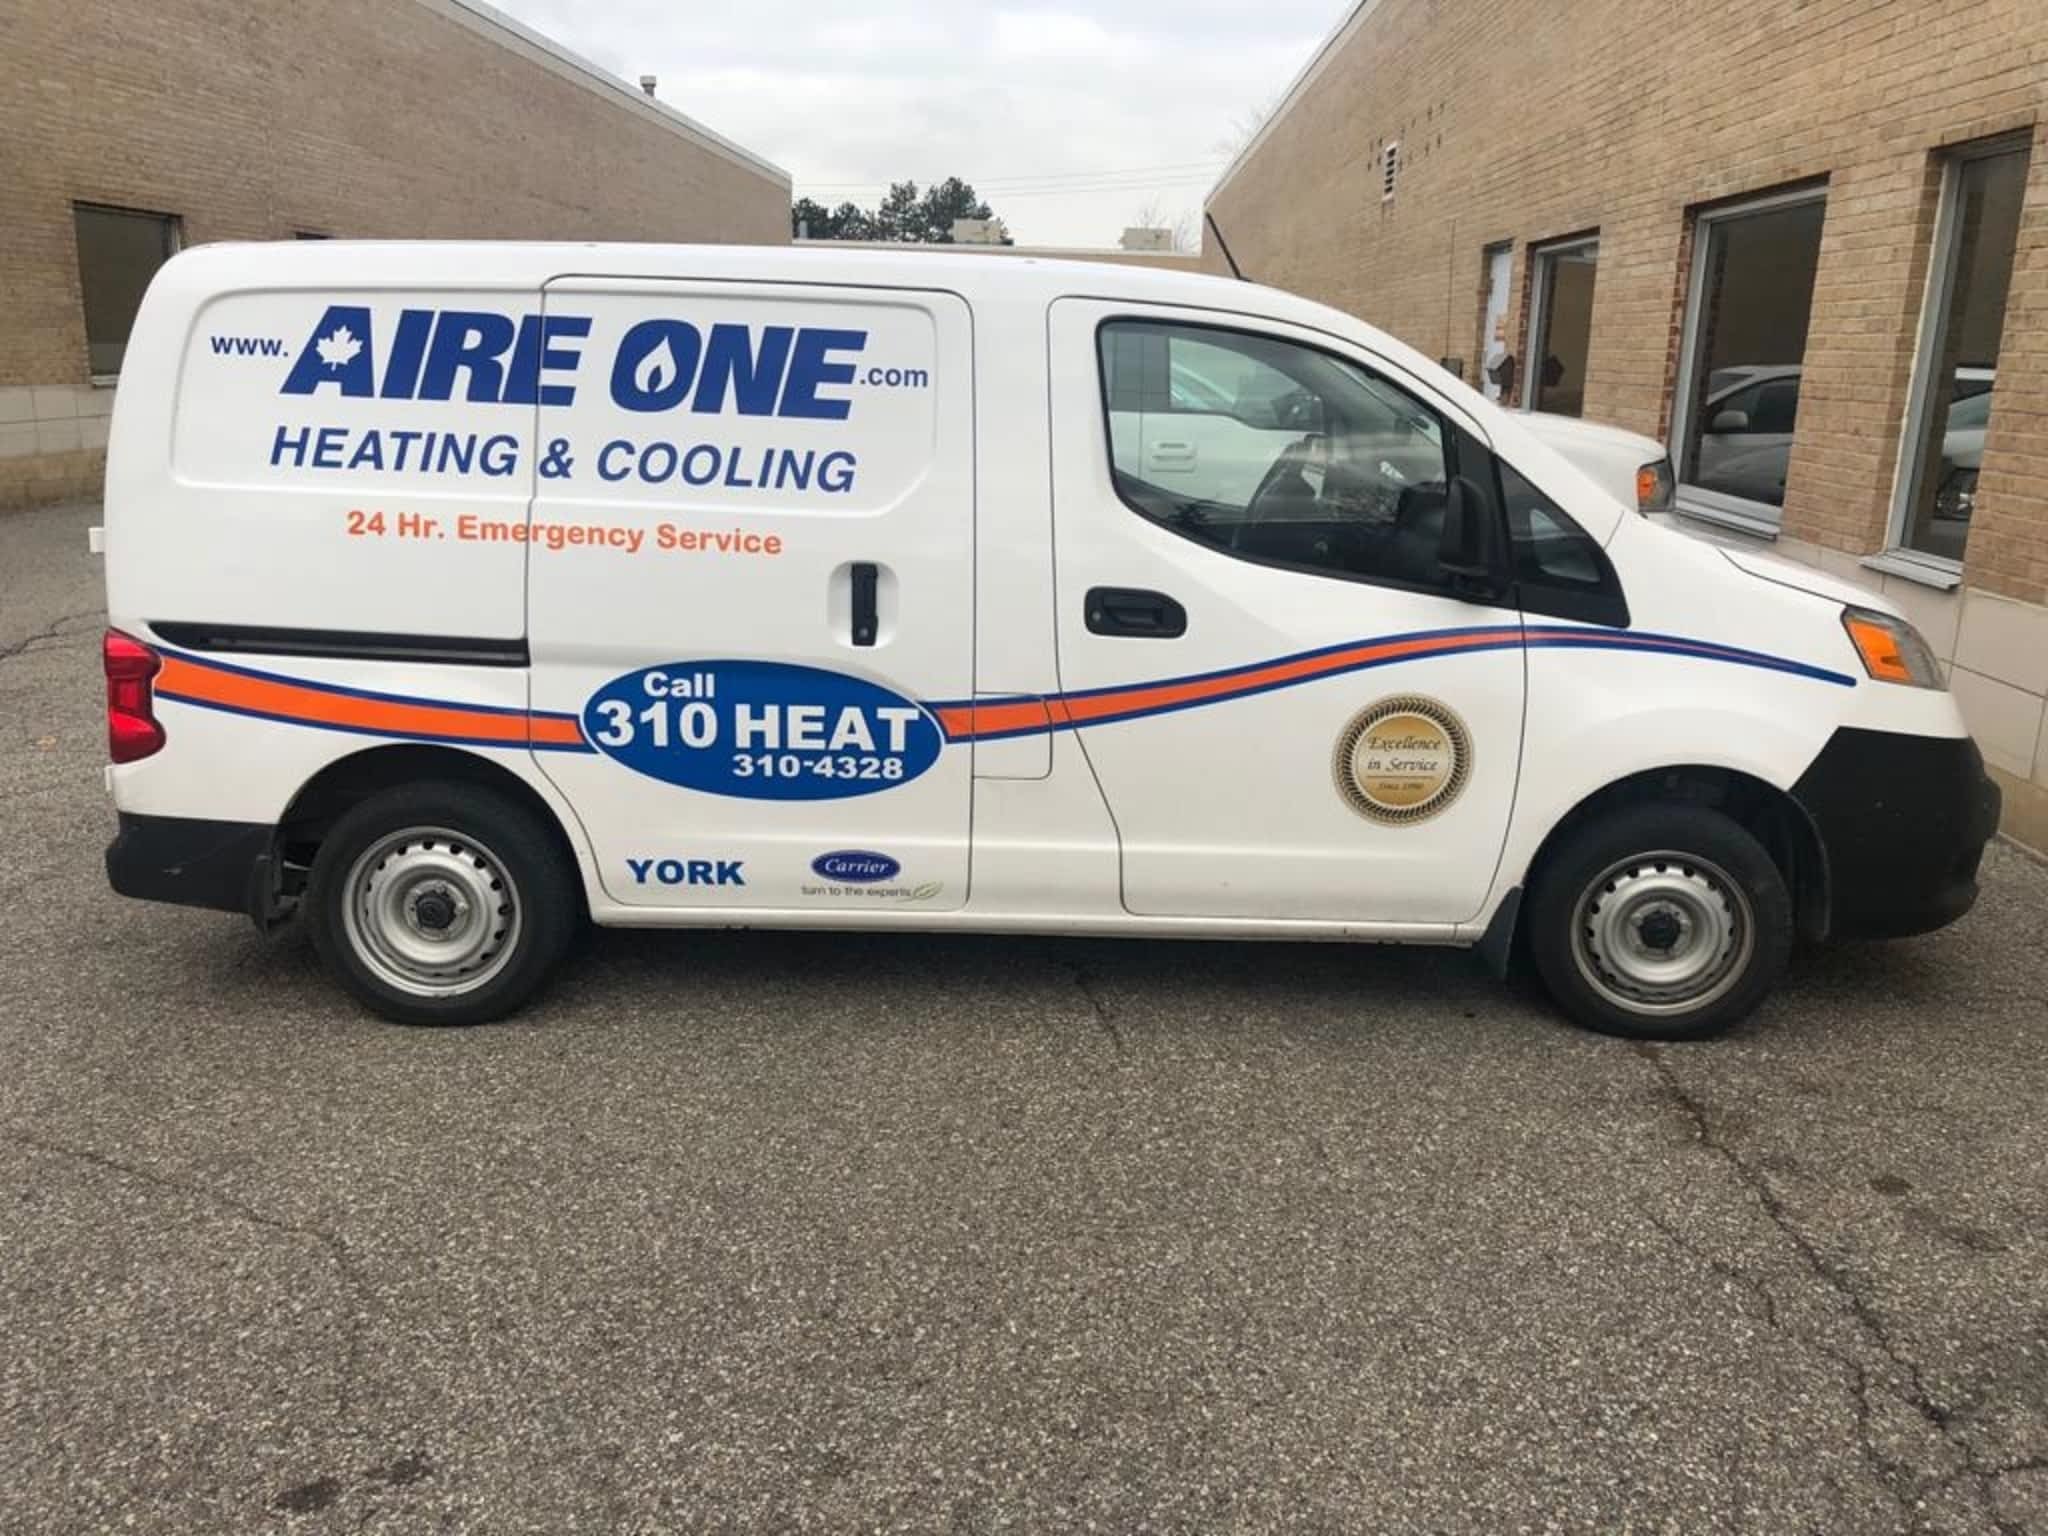 photo Aire One Peel Heating & Cooling